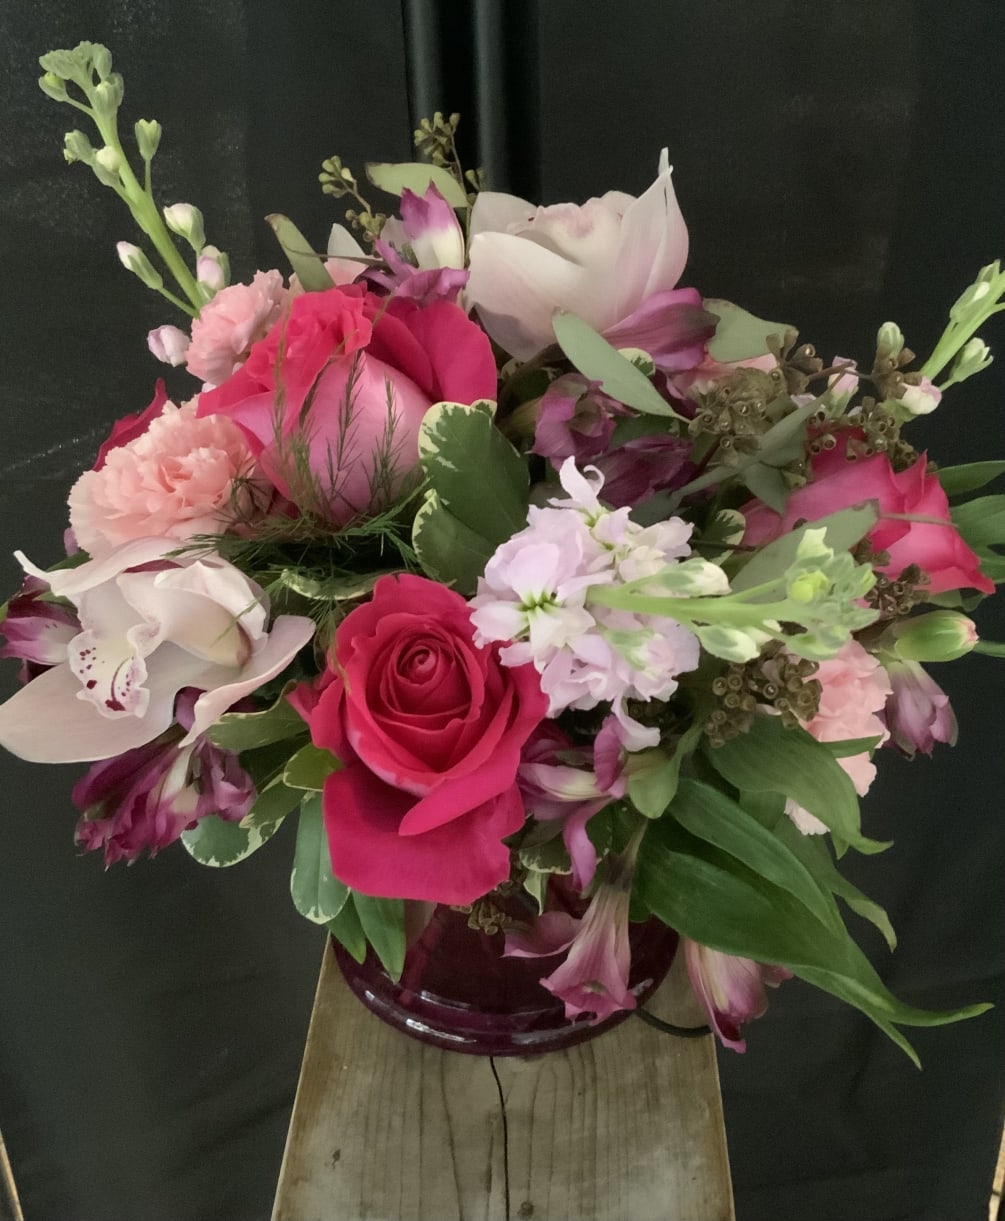 Beautiful hot pink roses, fragrant stock and cymbidium orchids are the focus